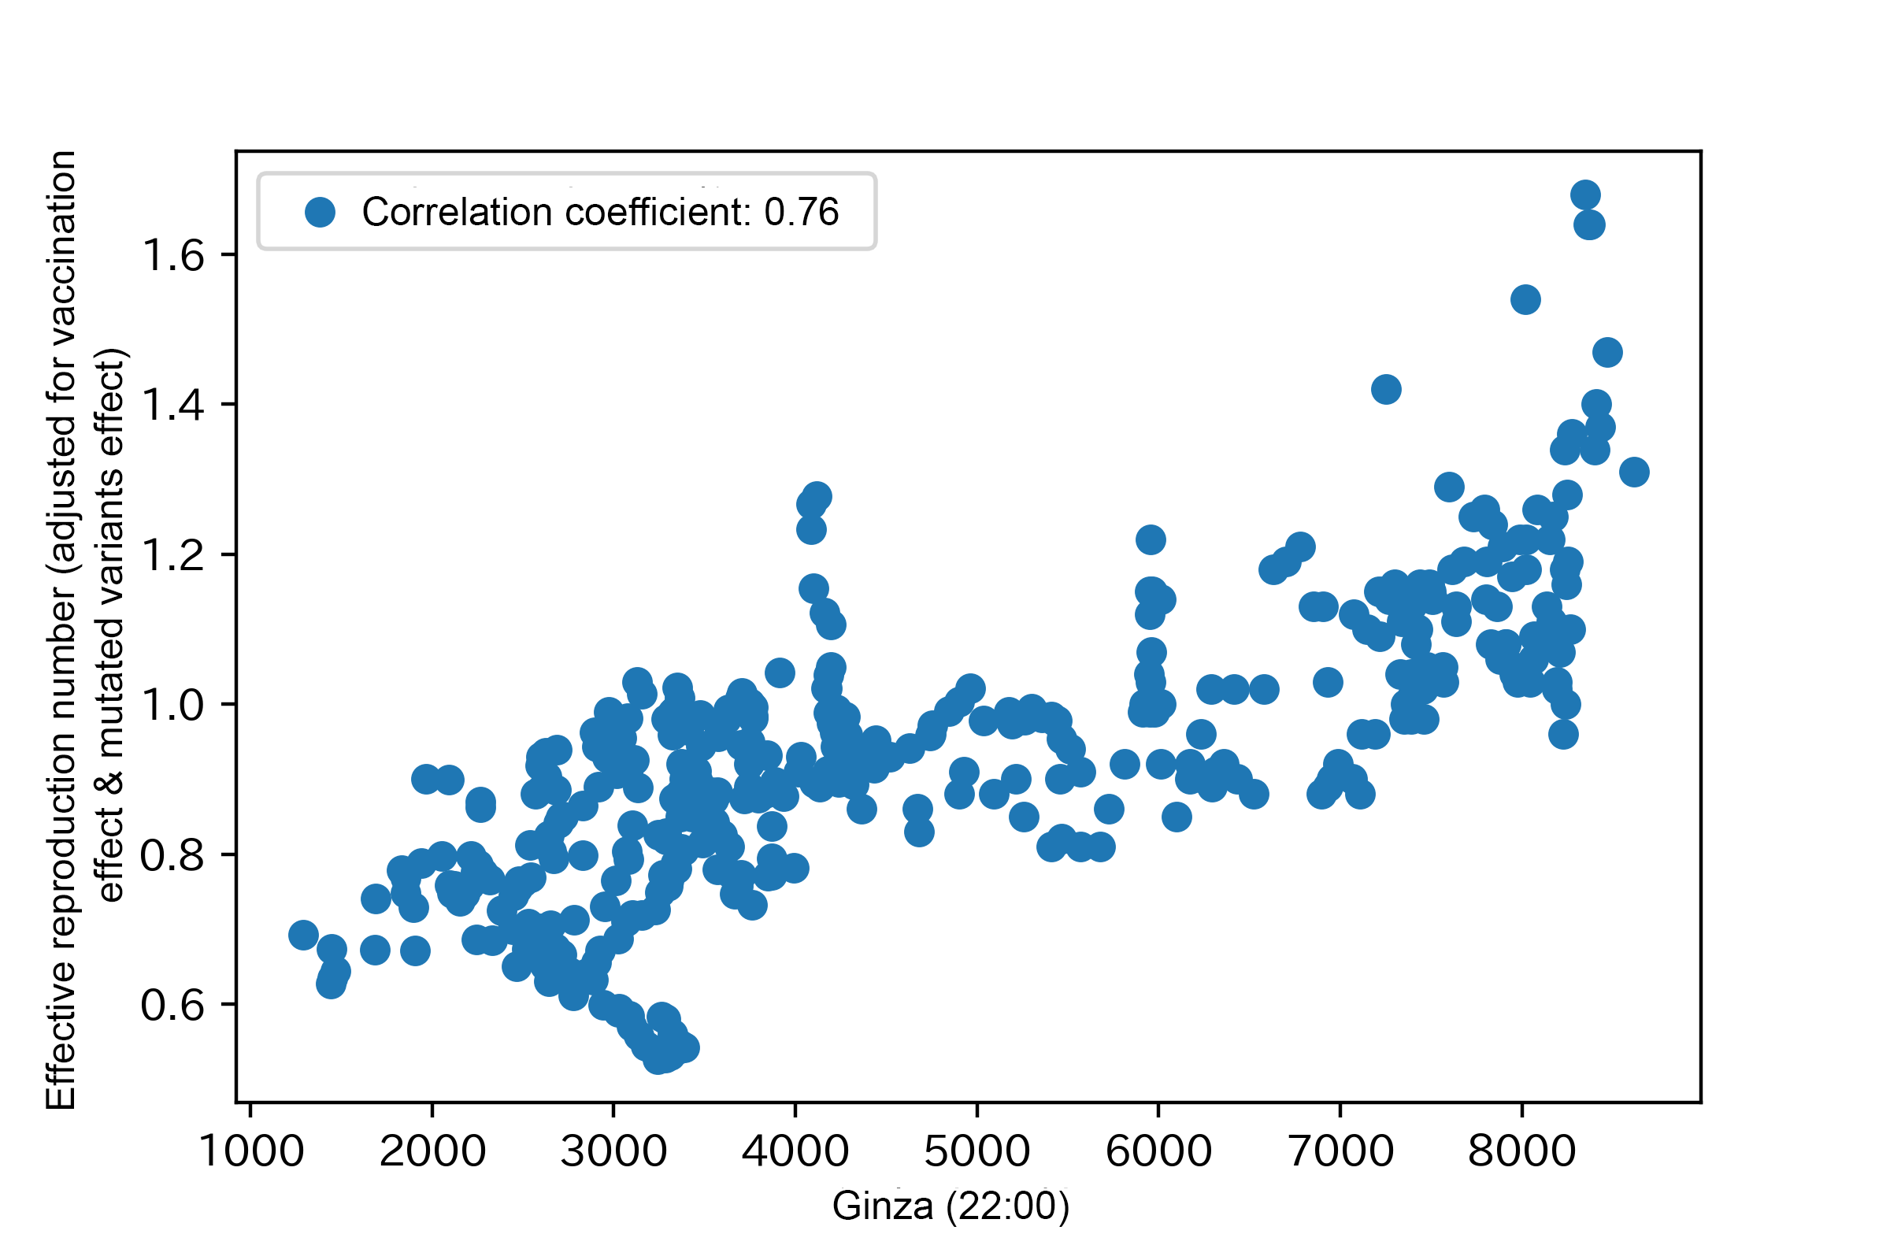 Example of data with high correlation